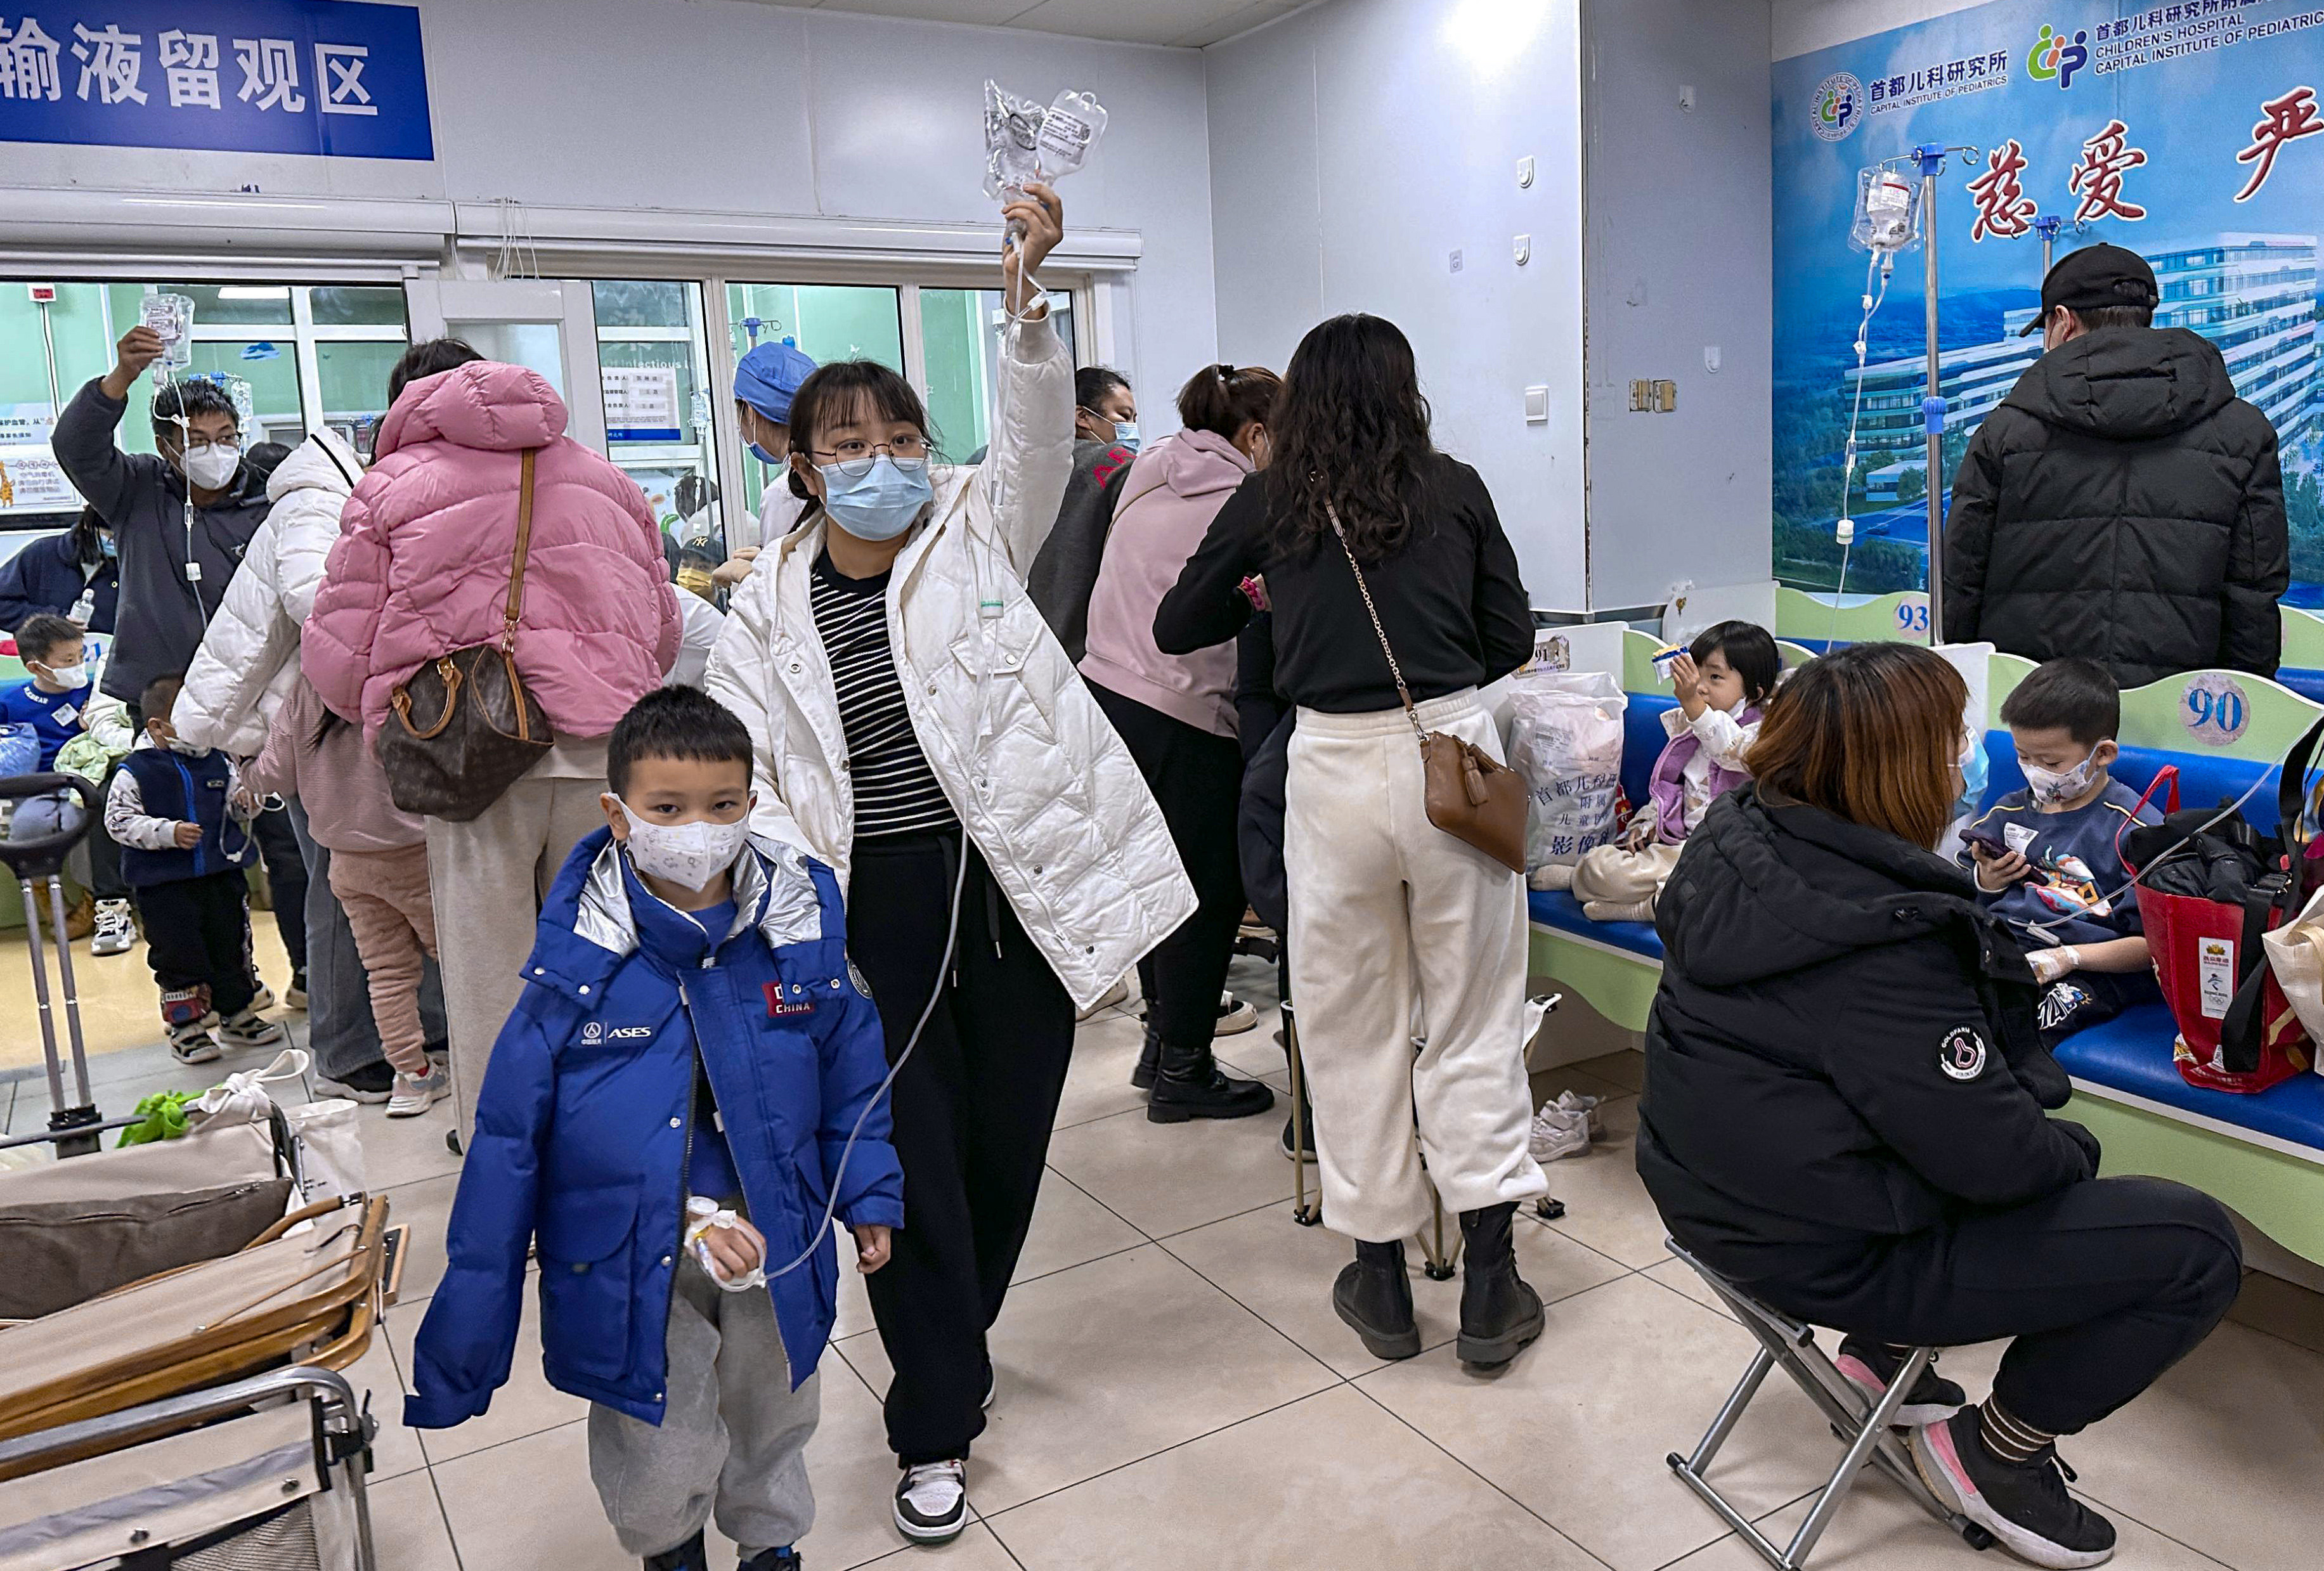 Children are hooked up to intravenous drips at a hospital in Beijing last week. Photo: Kyodo